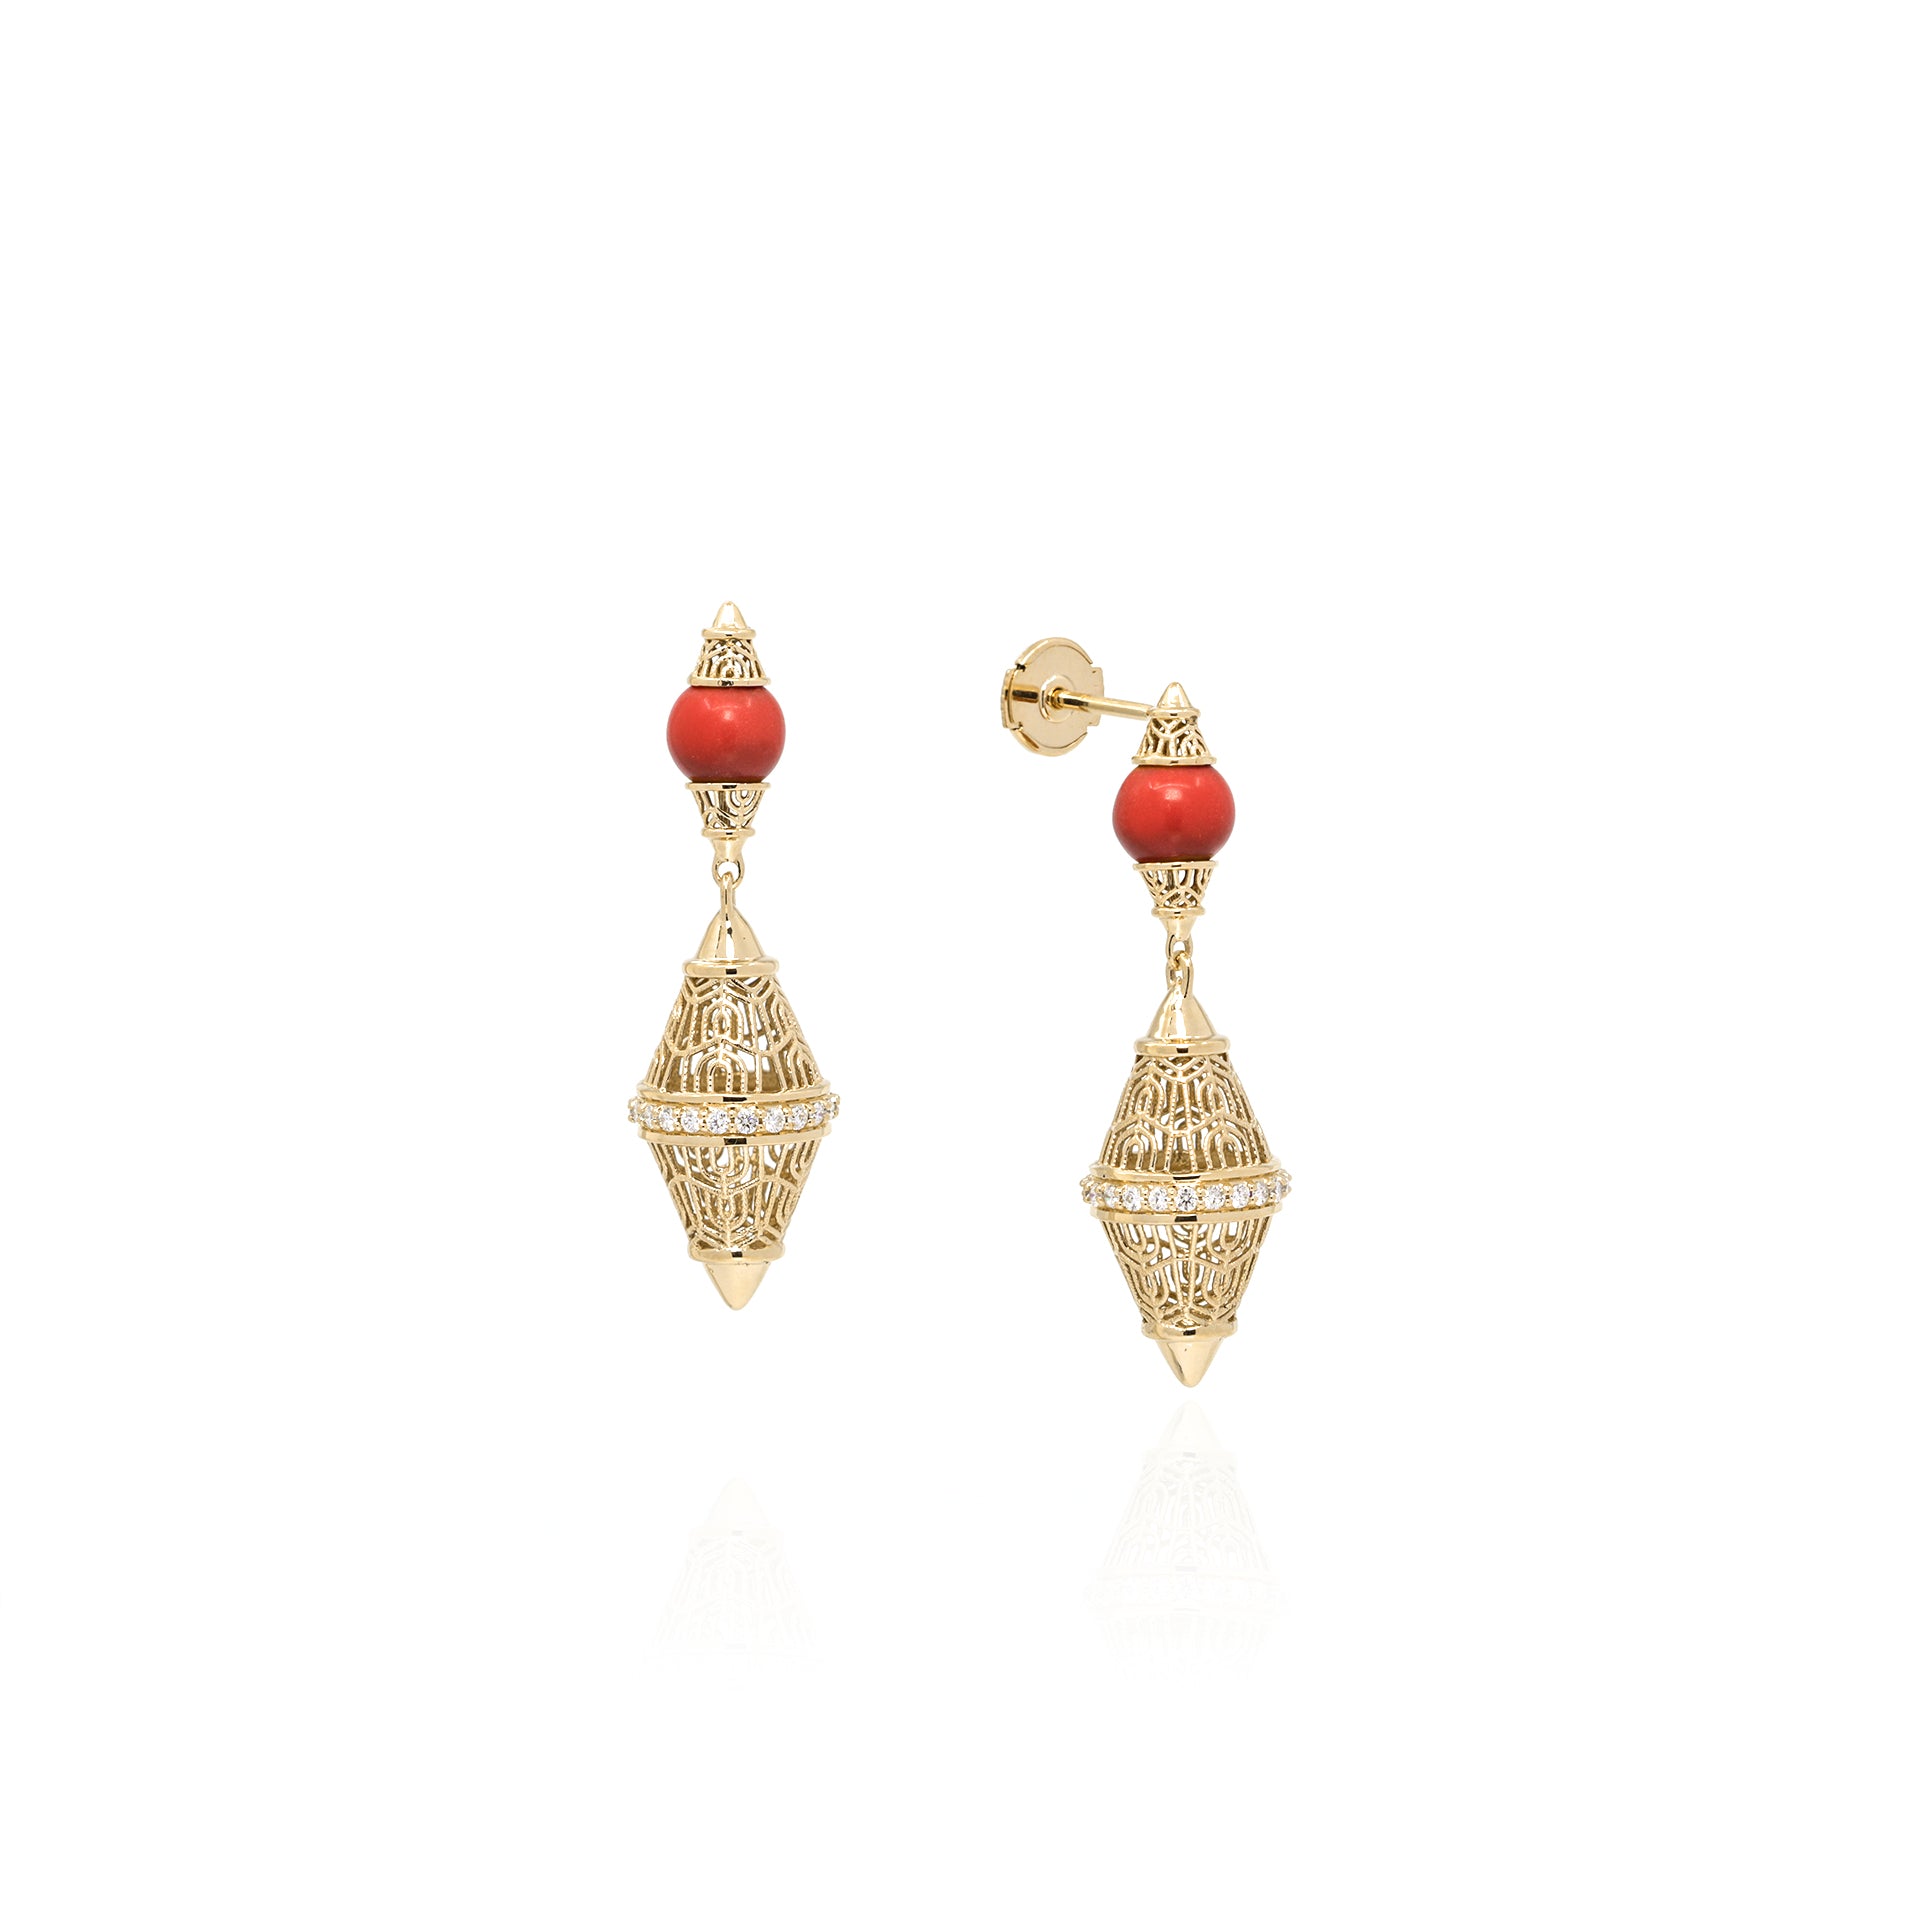 Al Merriyah Mood colour earrings in 18k Yellow gold with Coral and Diamonds